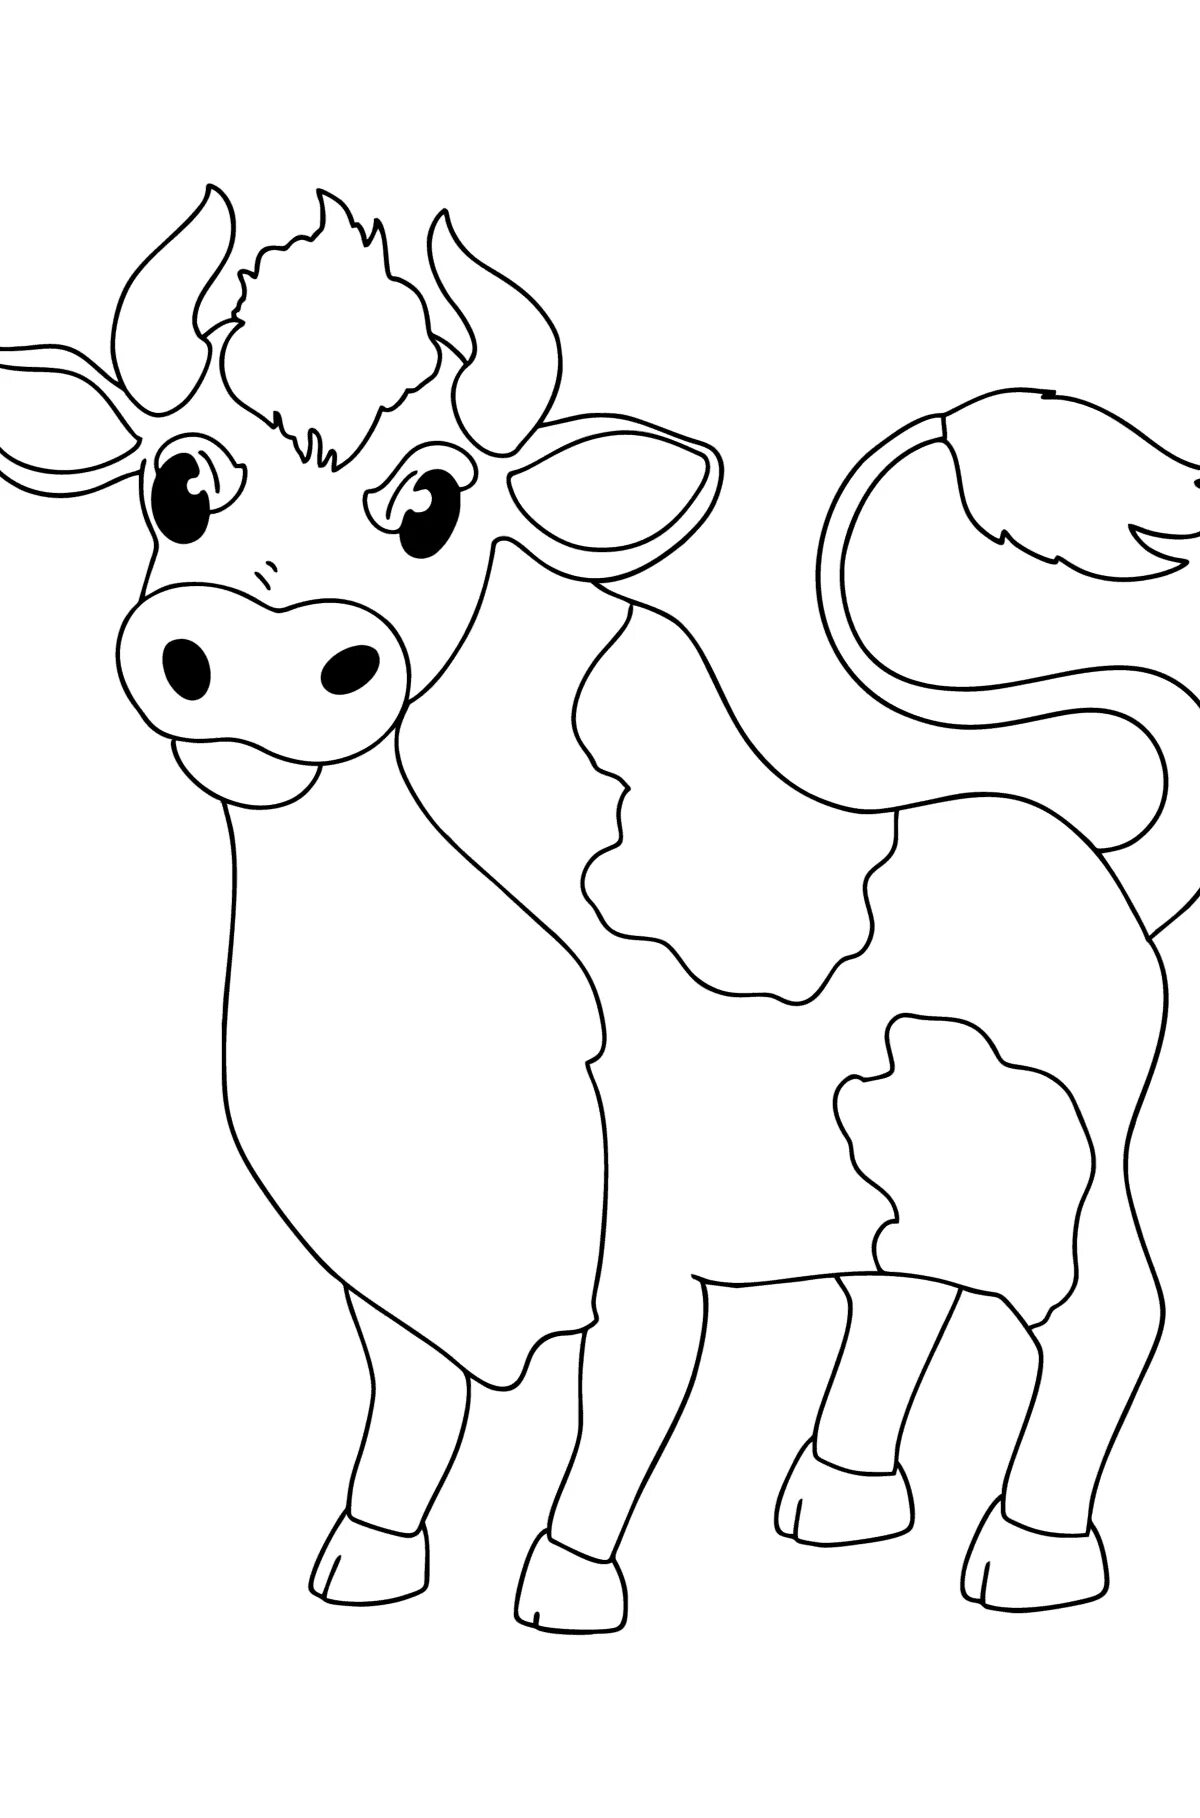 Fashionable bull coloring for kids